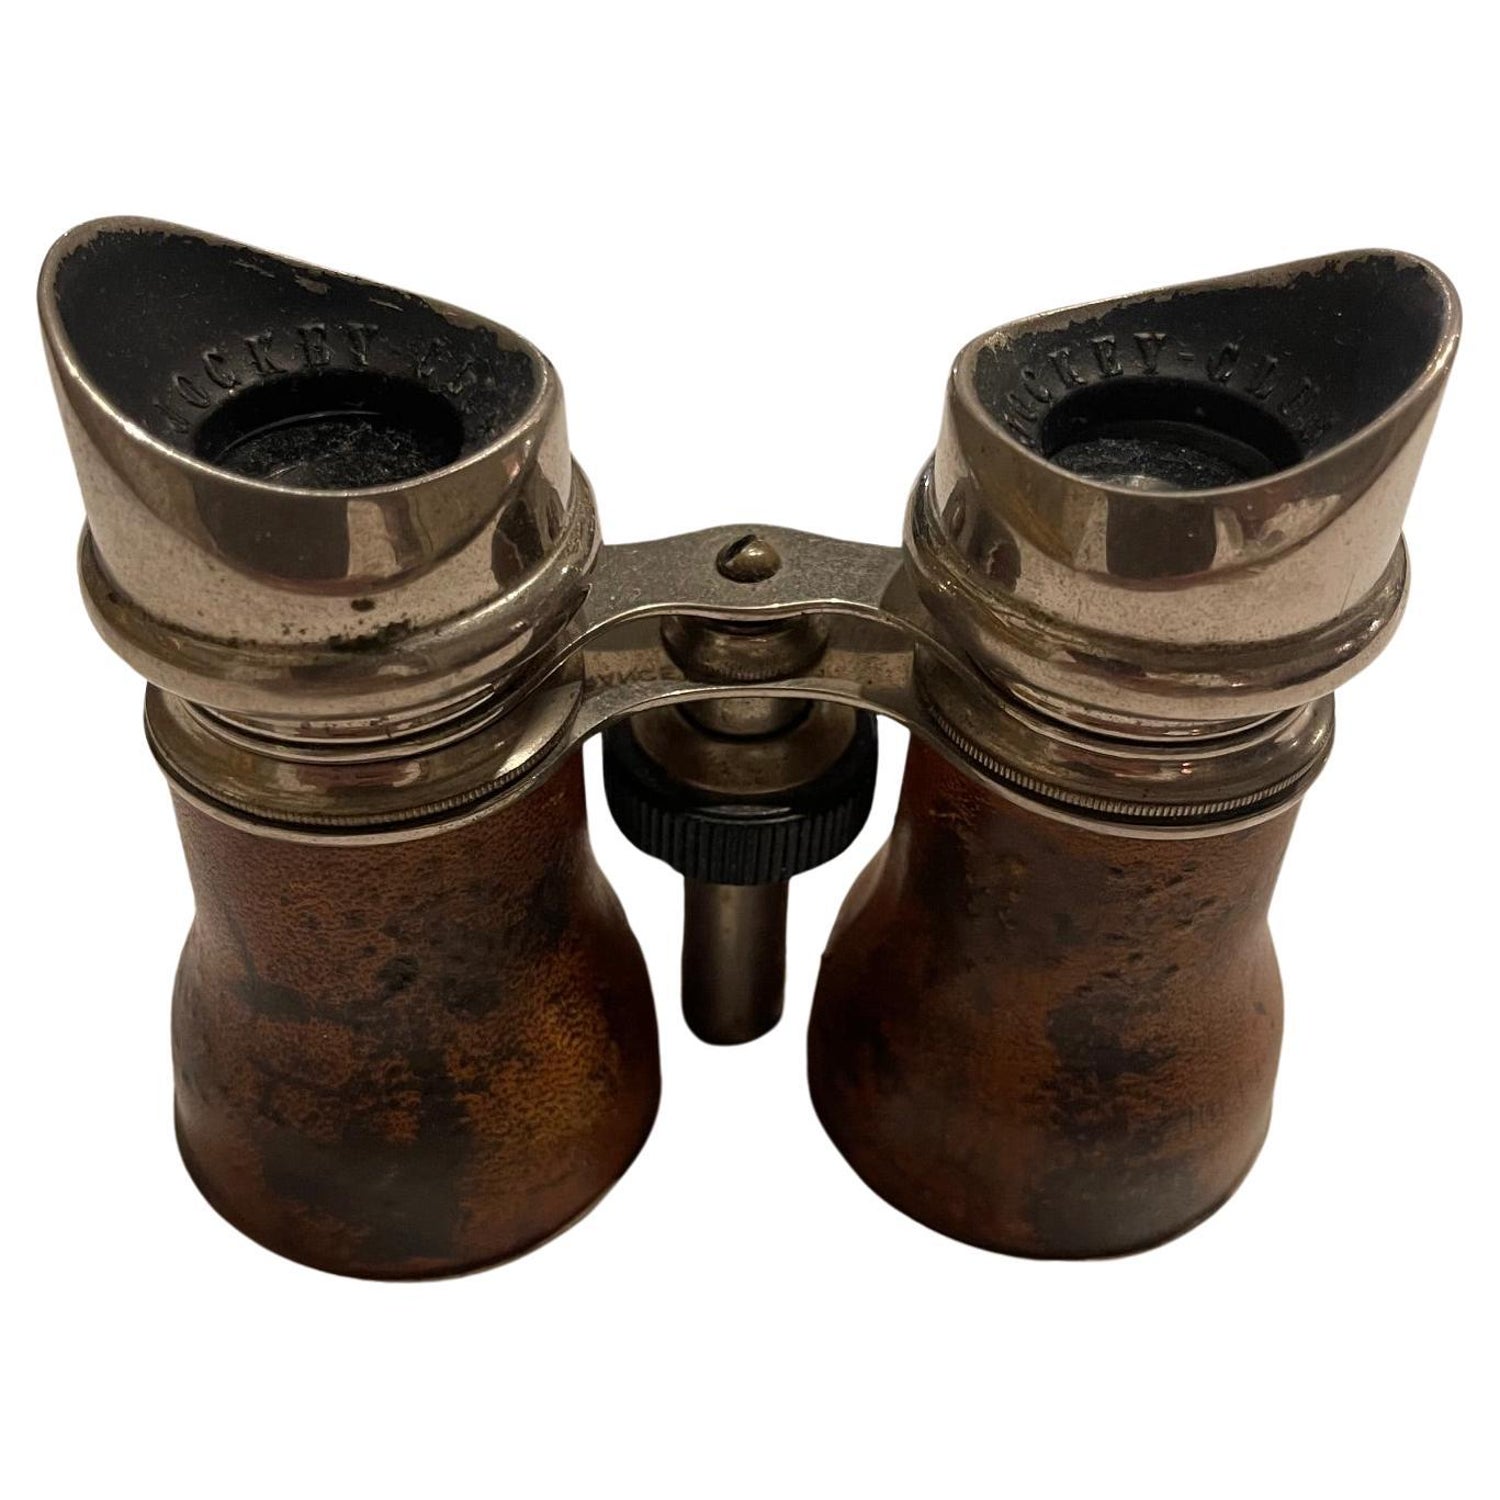 Antique "Le Jockey Club" 1930's Horse Racing Binoculars with Compass For  Sale at 1stDibs | le jockey club paris binoculars value, binoculars for  horse racing, vintage horse racing binoculars